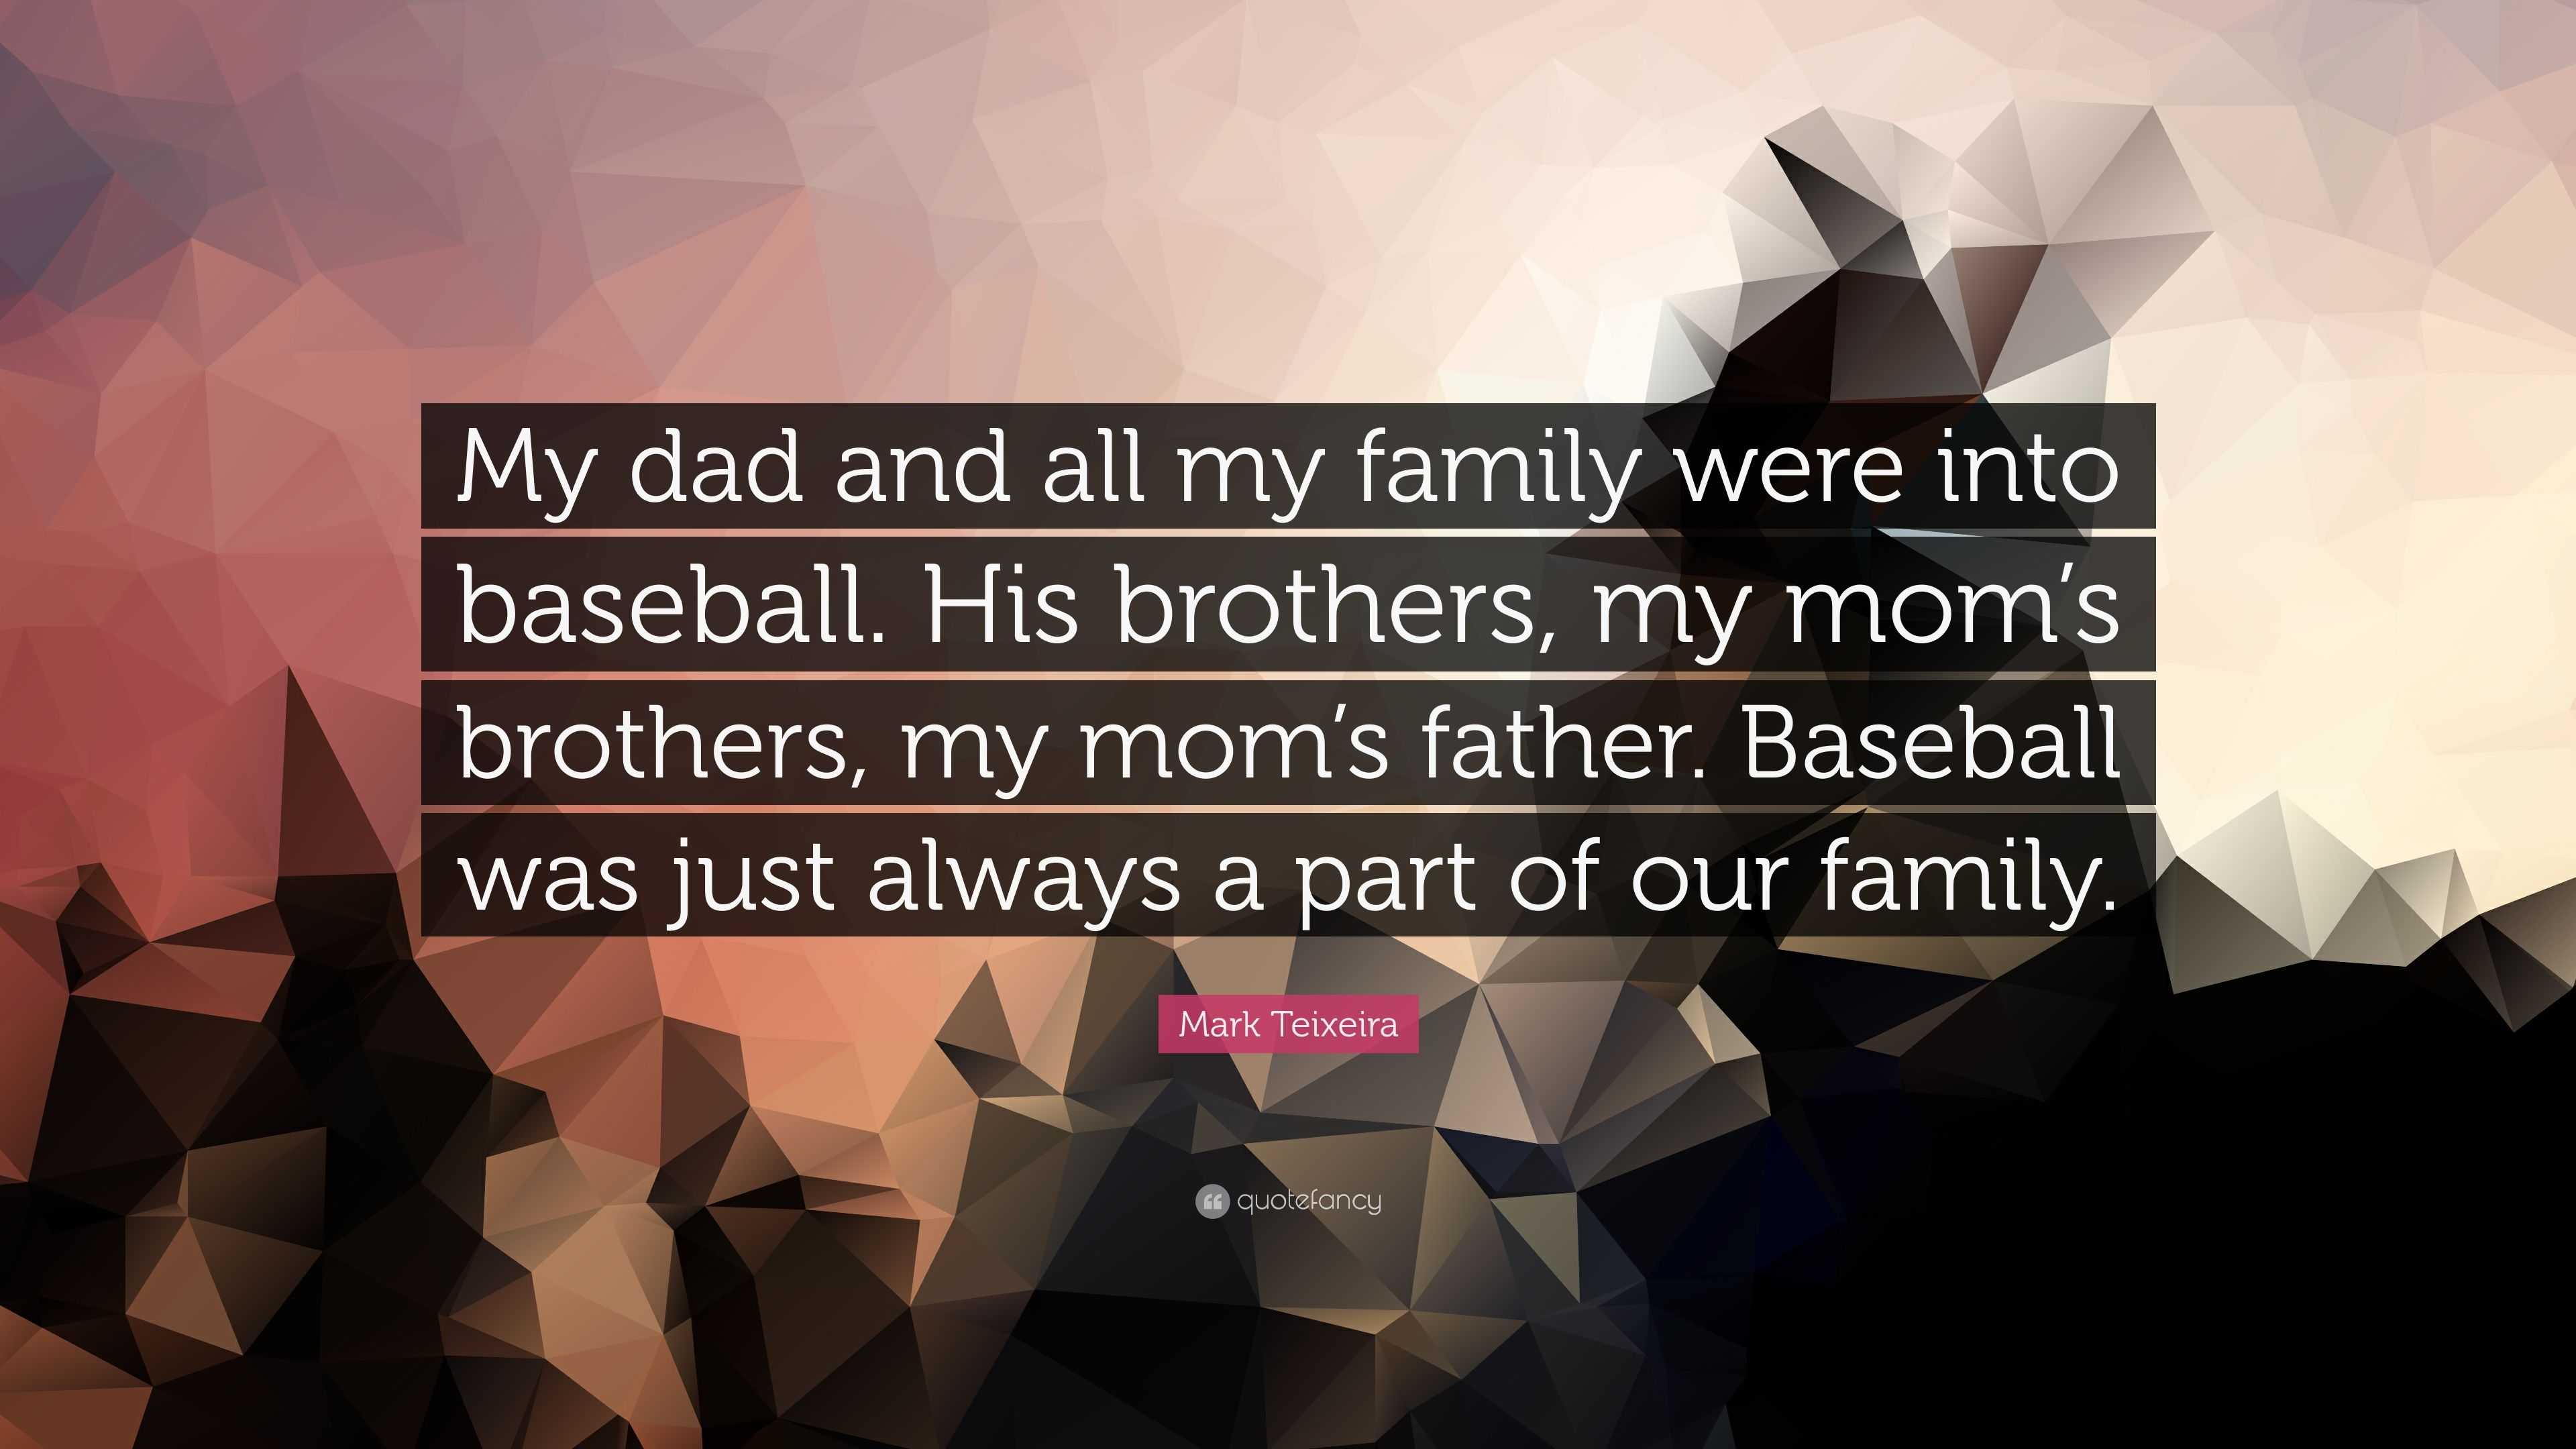 Mark Teixeira Quote: “My dad and all my family were into baseball